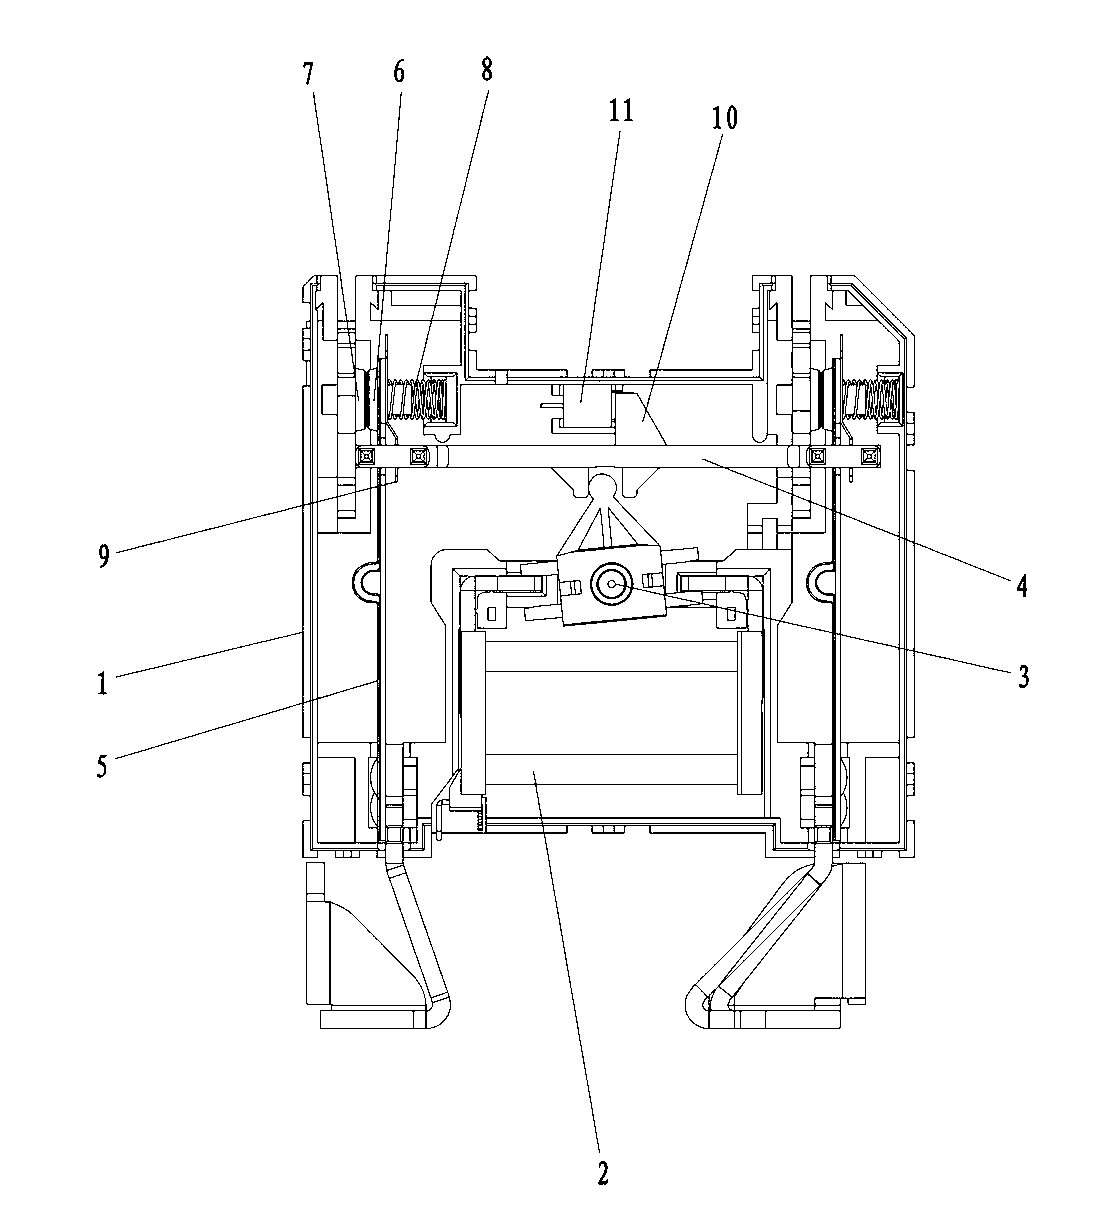 Three-closing-force magnetic latching relay capable of monitoring opening and closing states of movable and static contacts